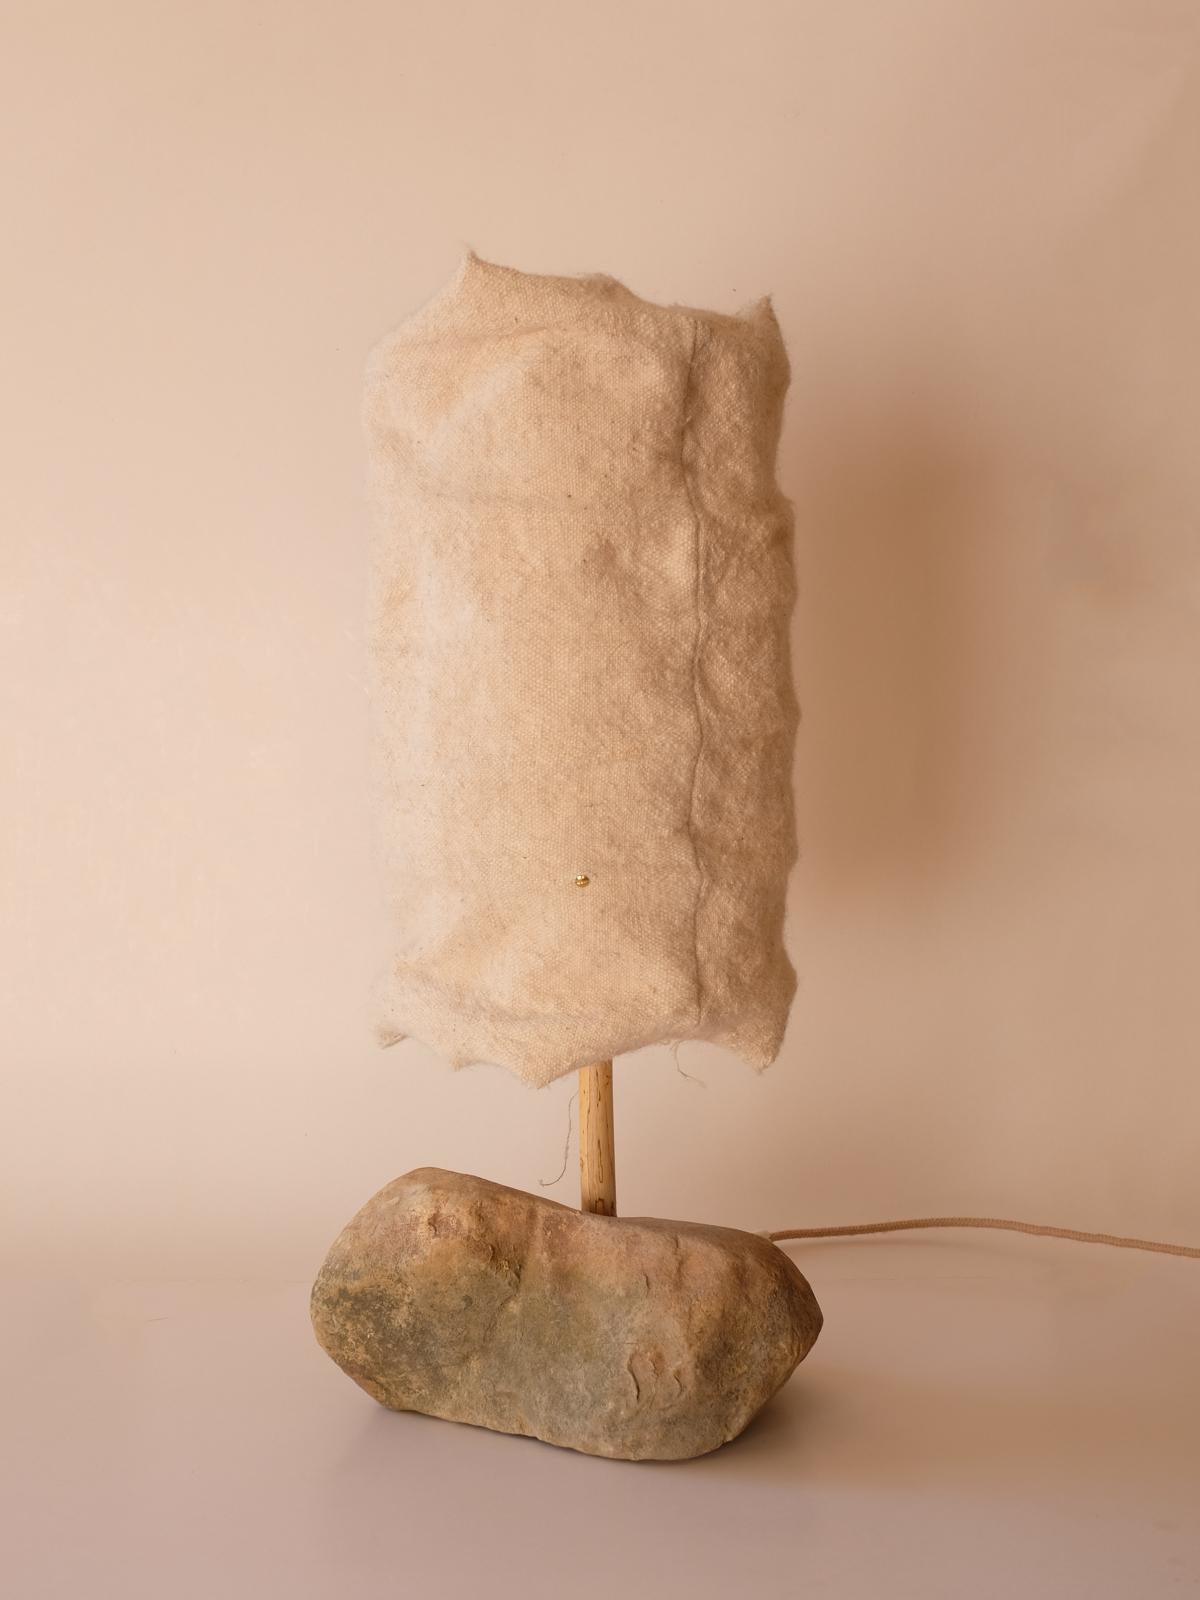 Stone Hjra Table Lamp Large, Handspun, Handwoven wool Lampshade, Made of Rock & Reed For Sale